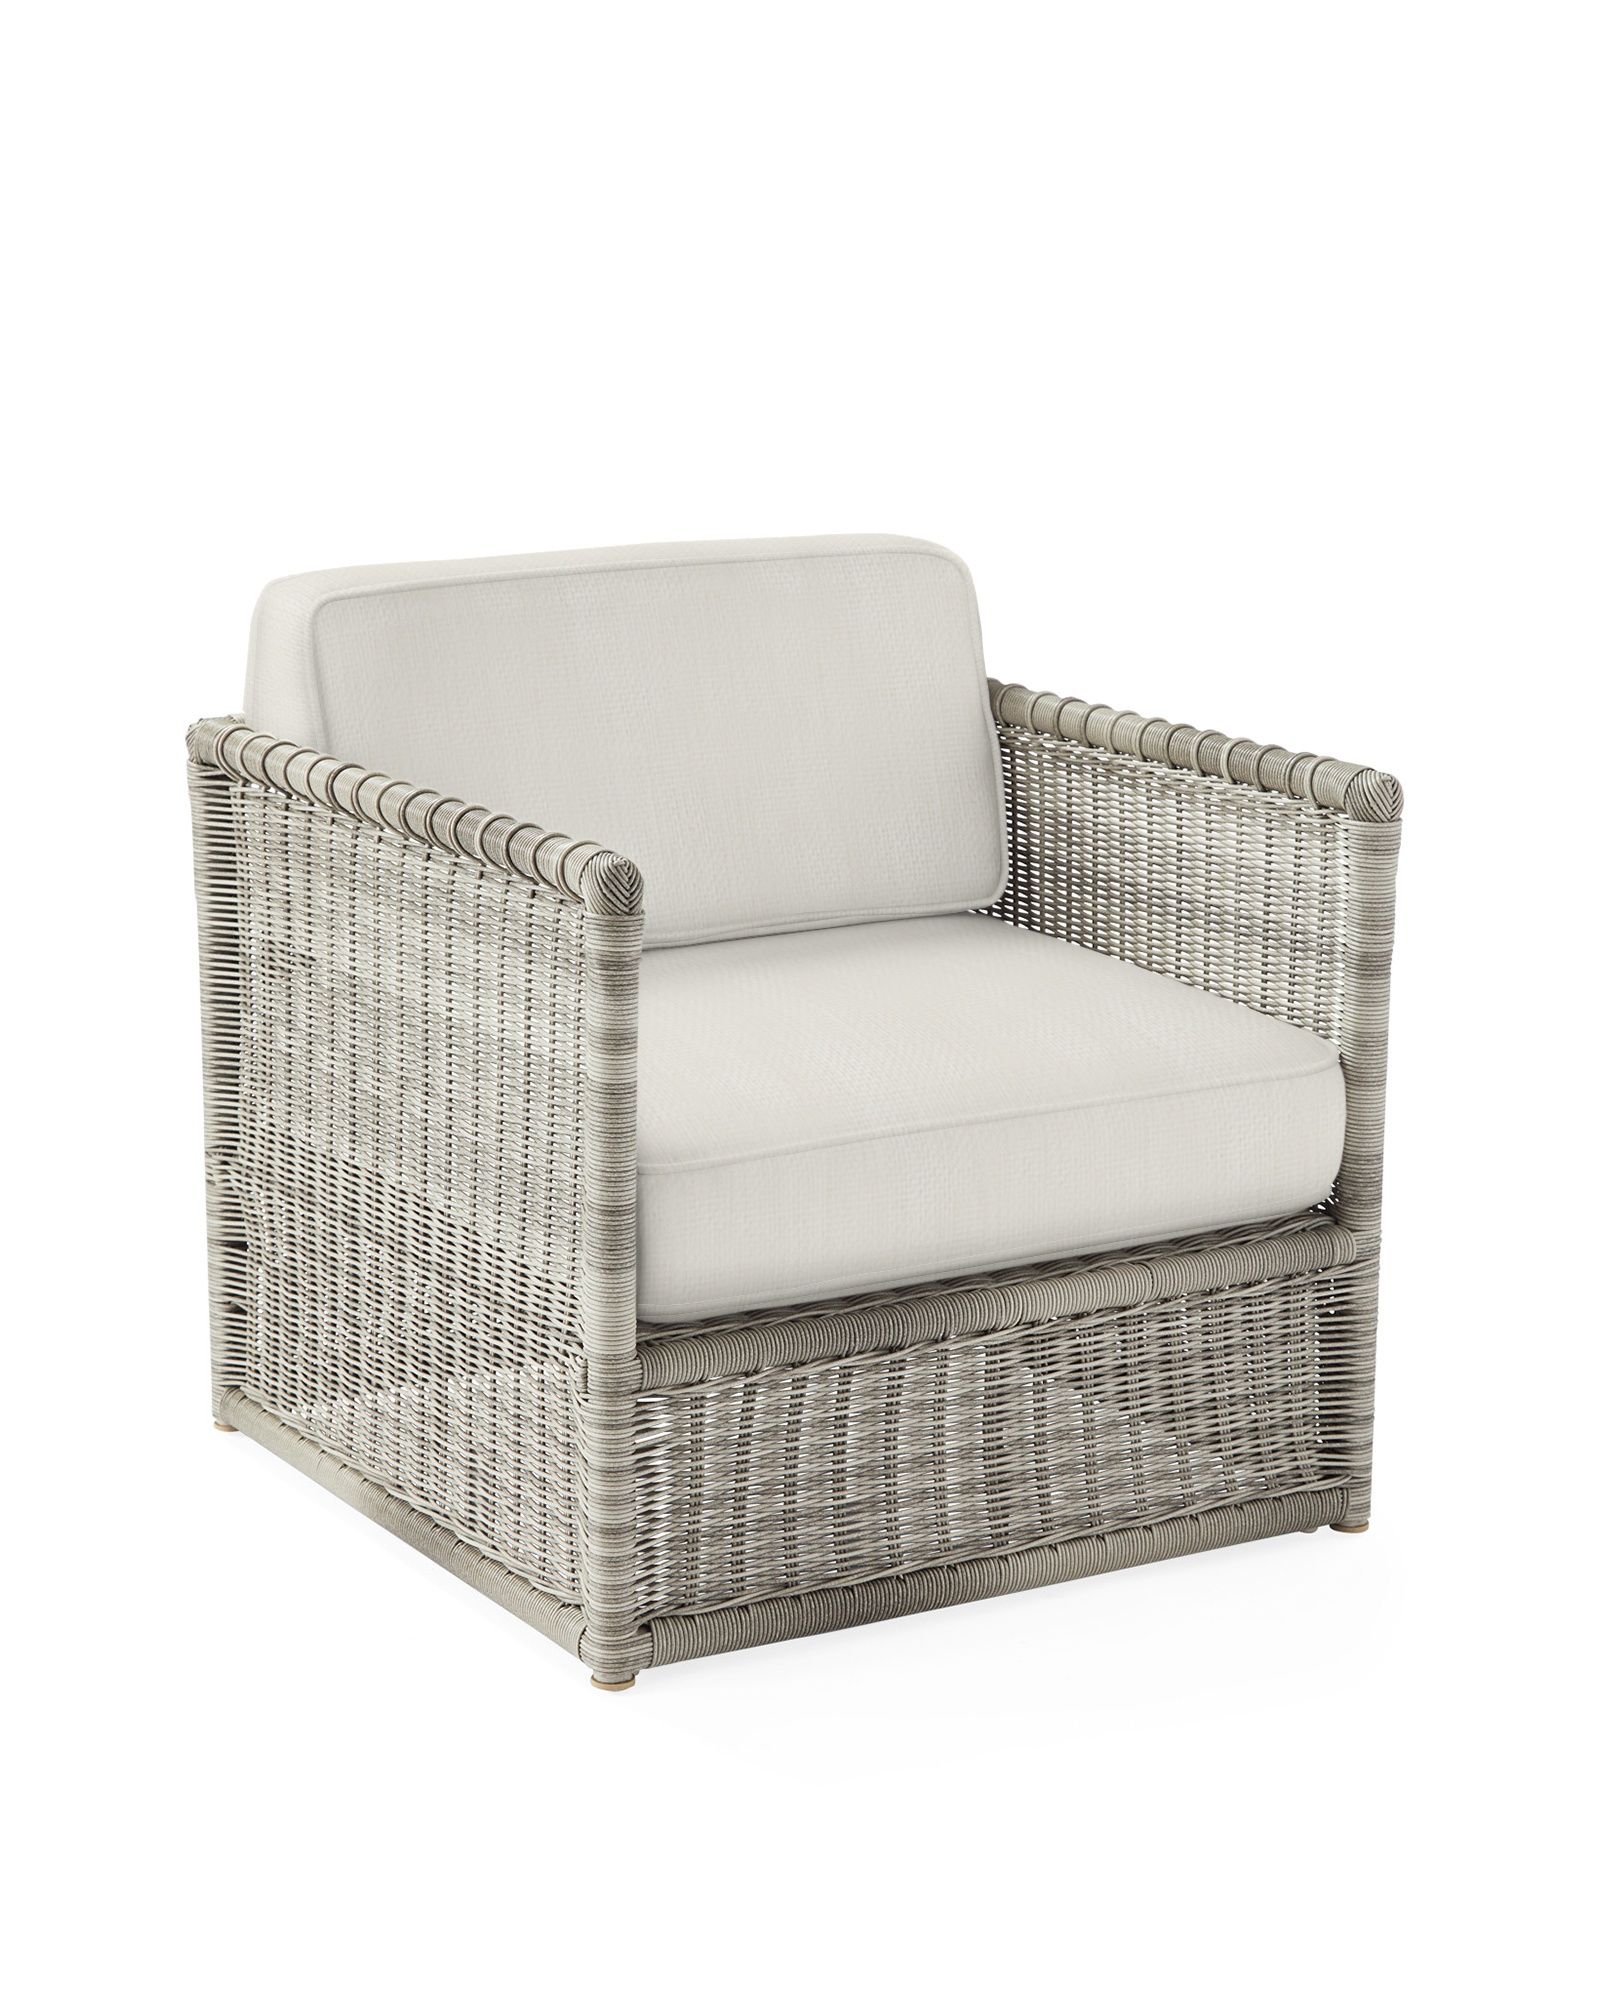 Pacifica Lounge Chair - Harbor Grey | Serena and Lily